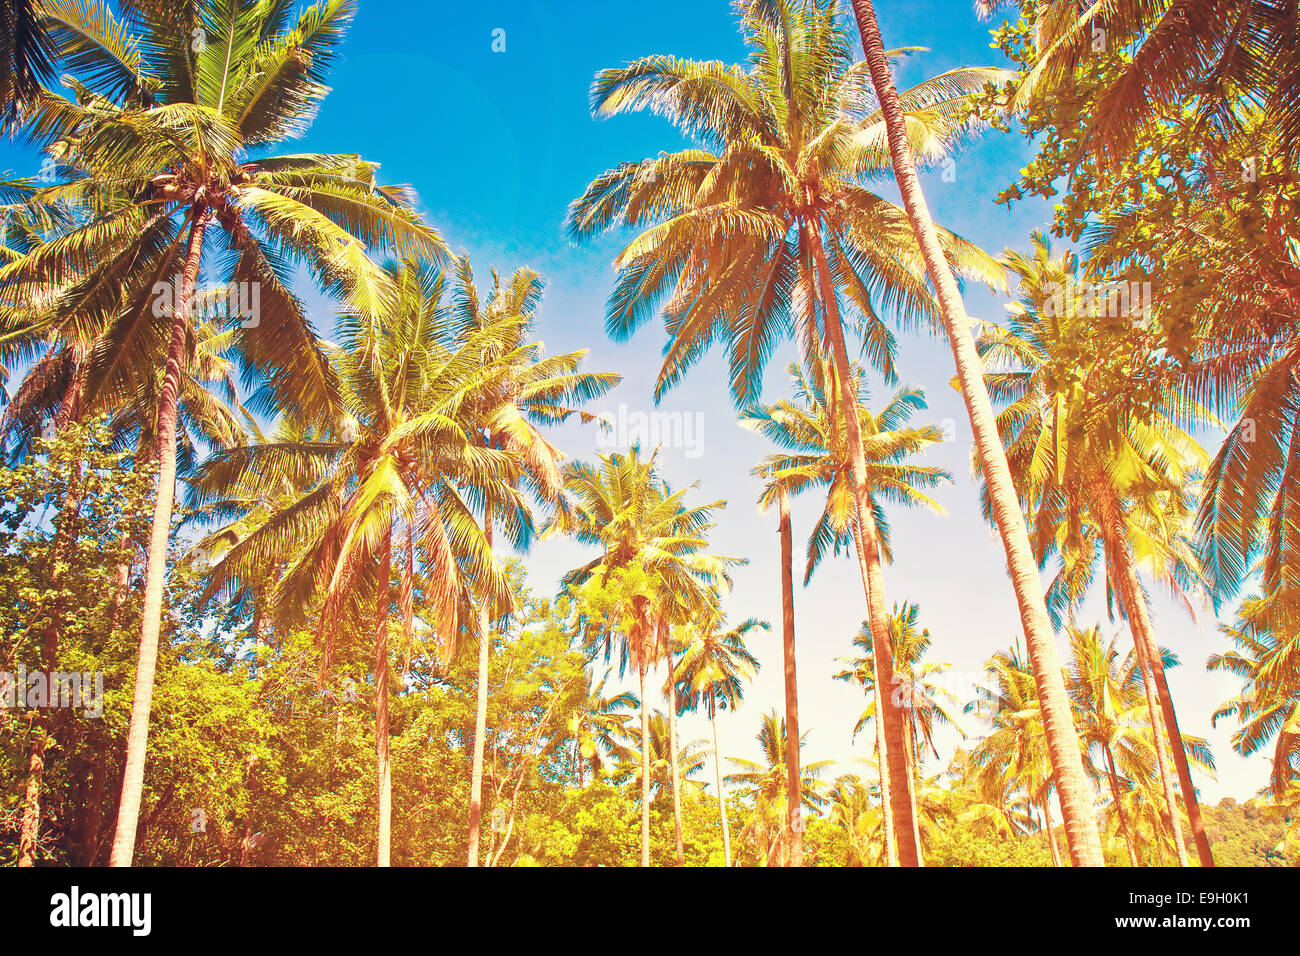 Coconut palm trees perspective view Stock Photo